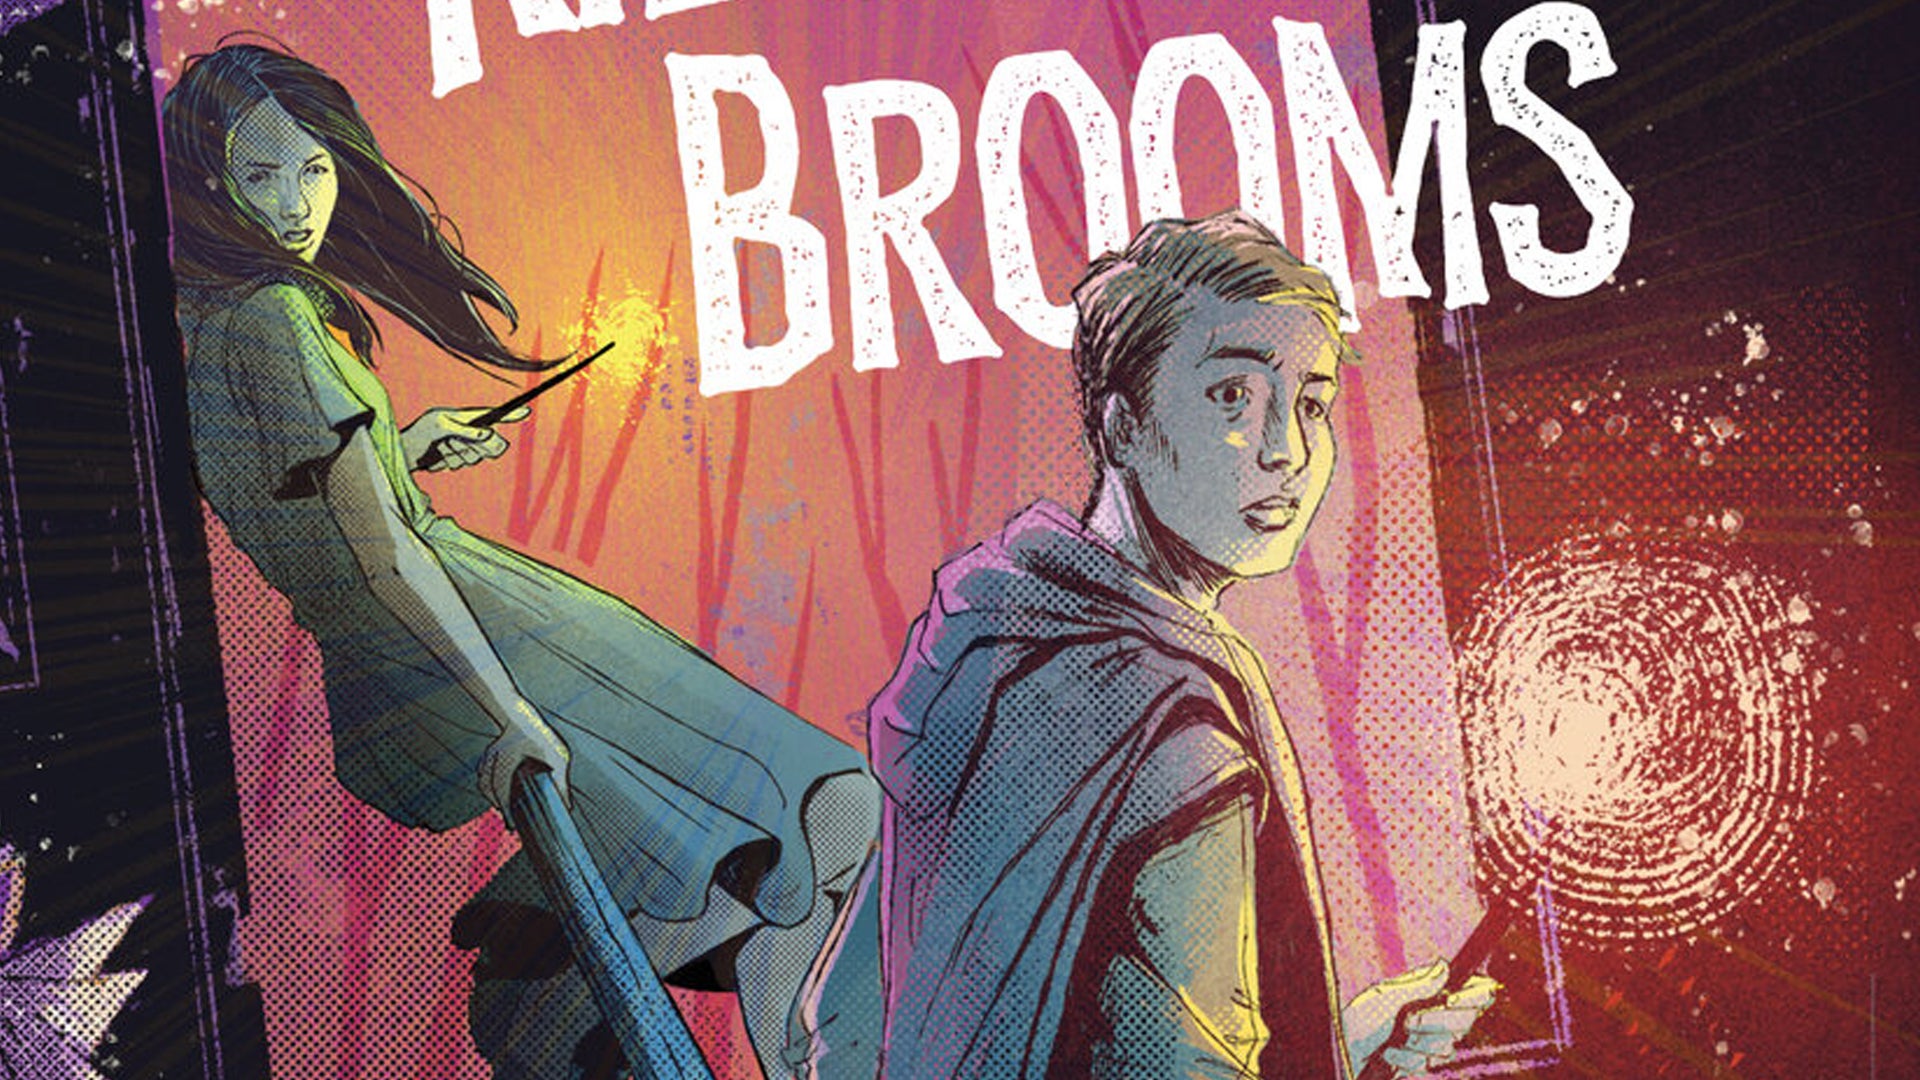 Image for Kids on Brooms creator announces roleplaying games for Free RPG Day